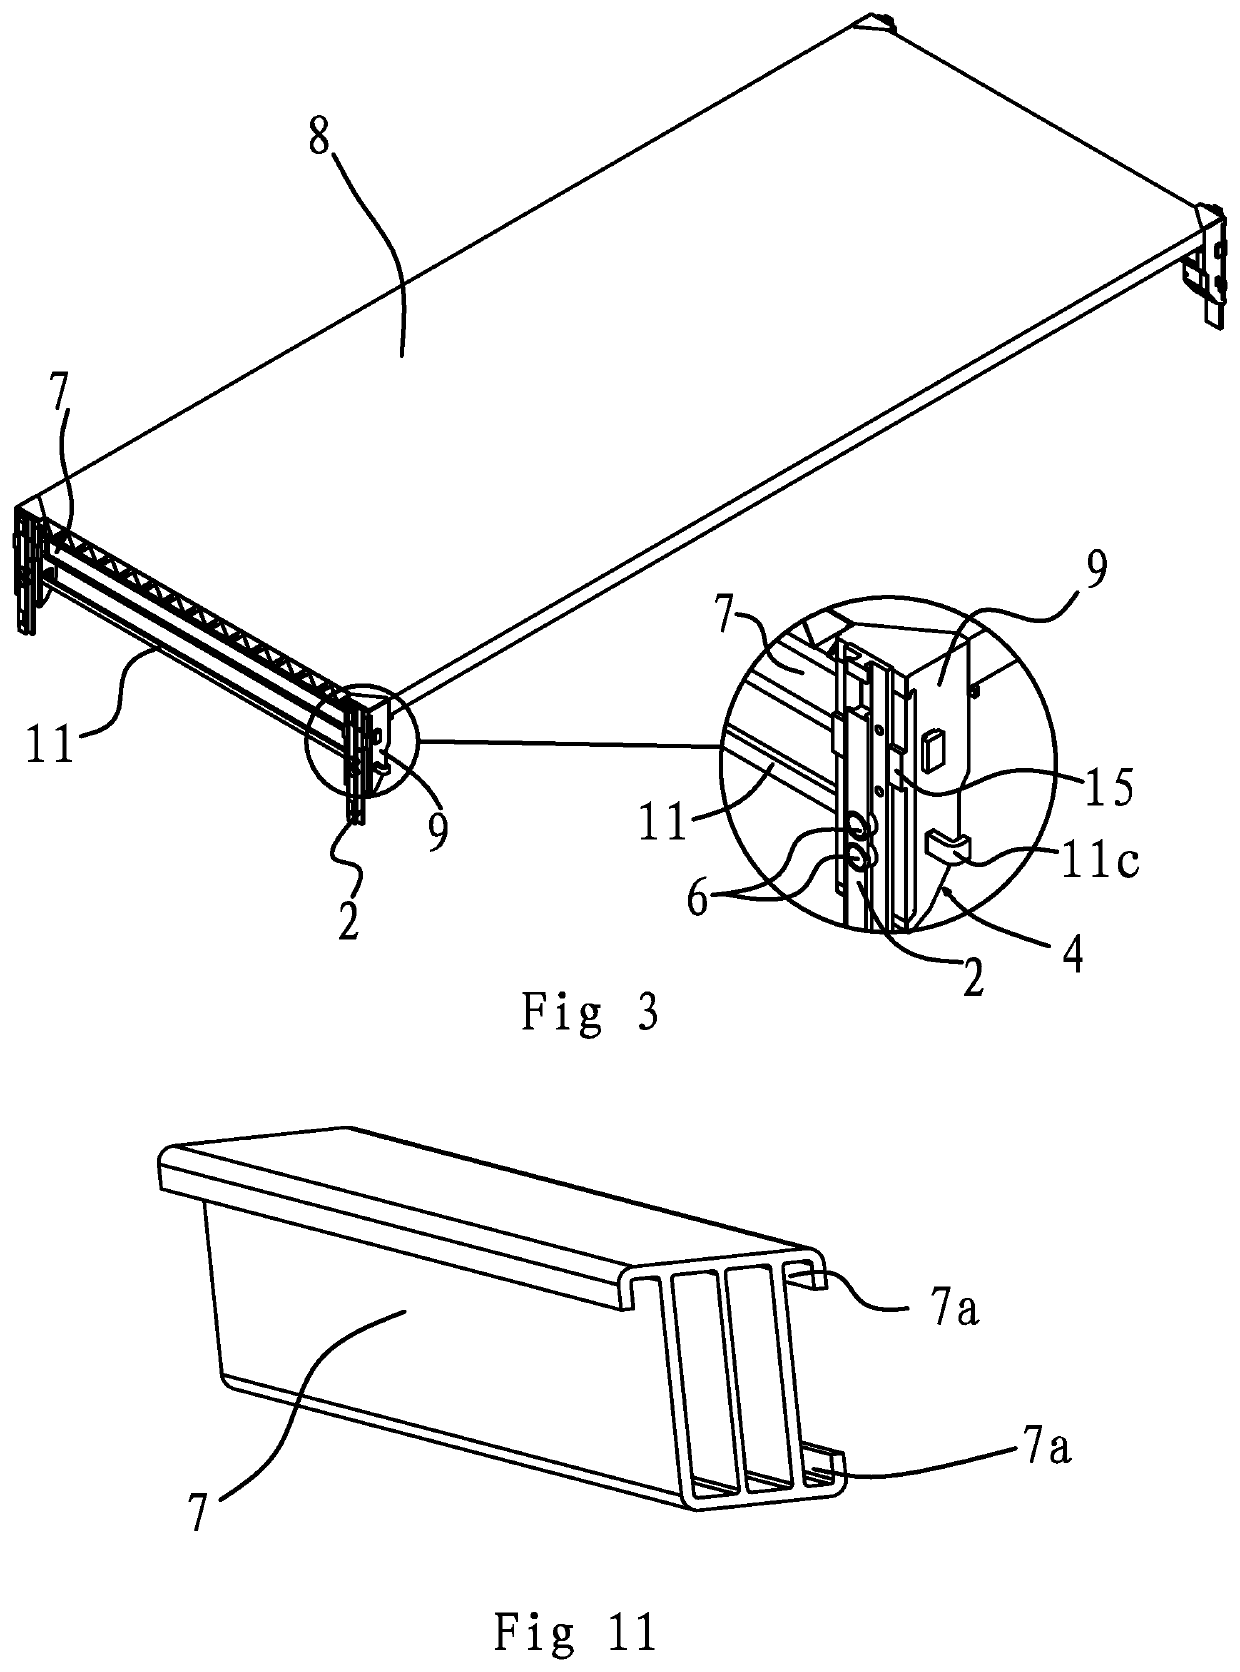 A Carriage Decking Device